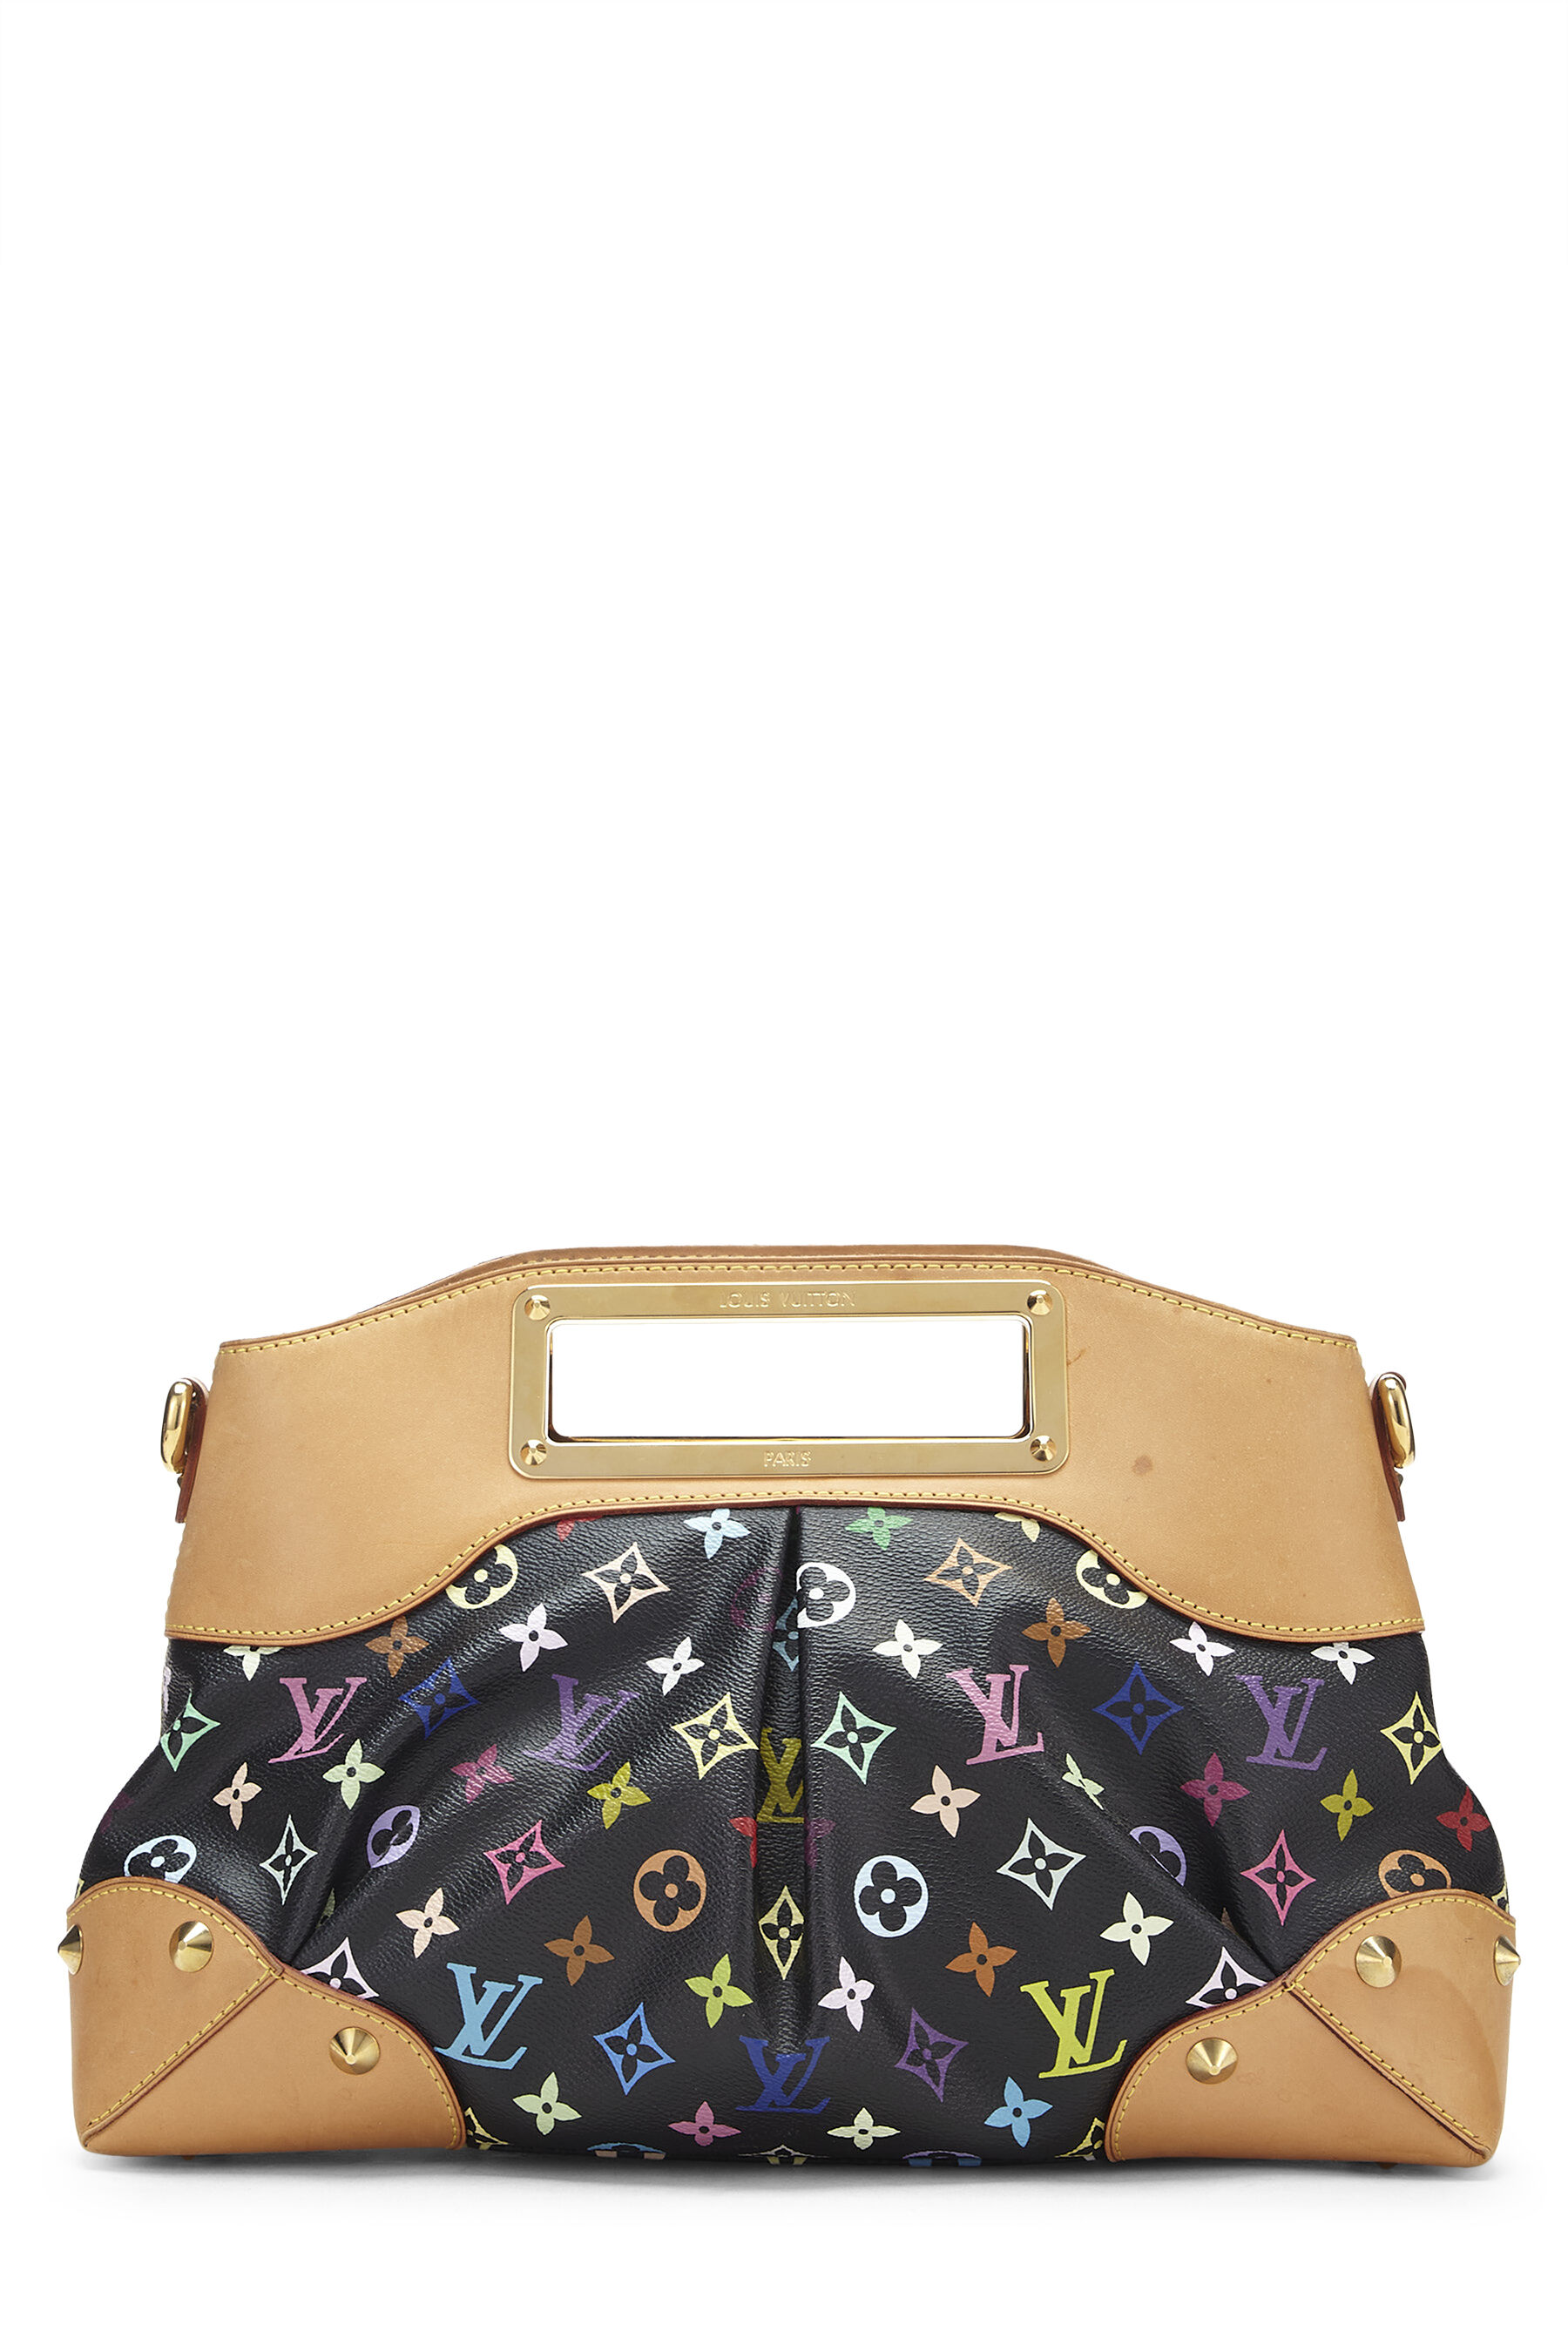 Louis Vuitton's Murakami Monogram Bags Are Being Discontinued